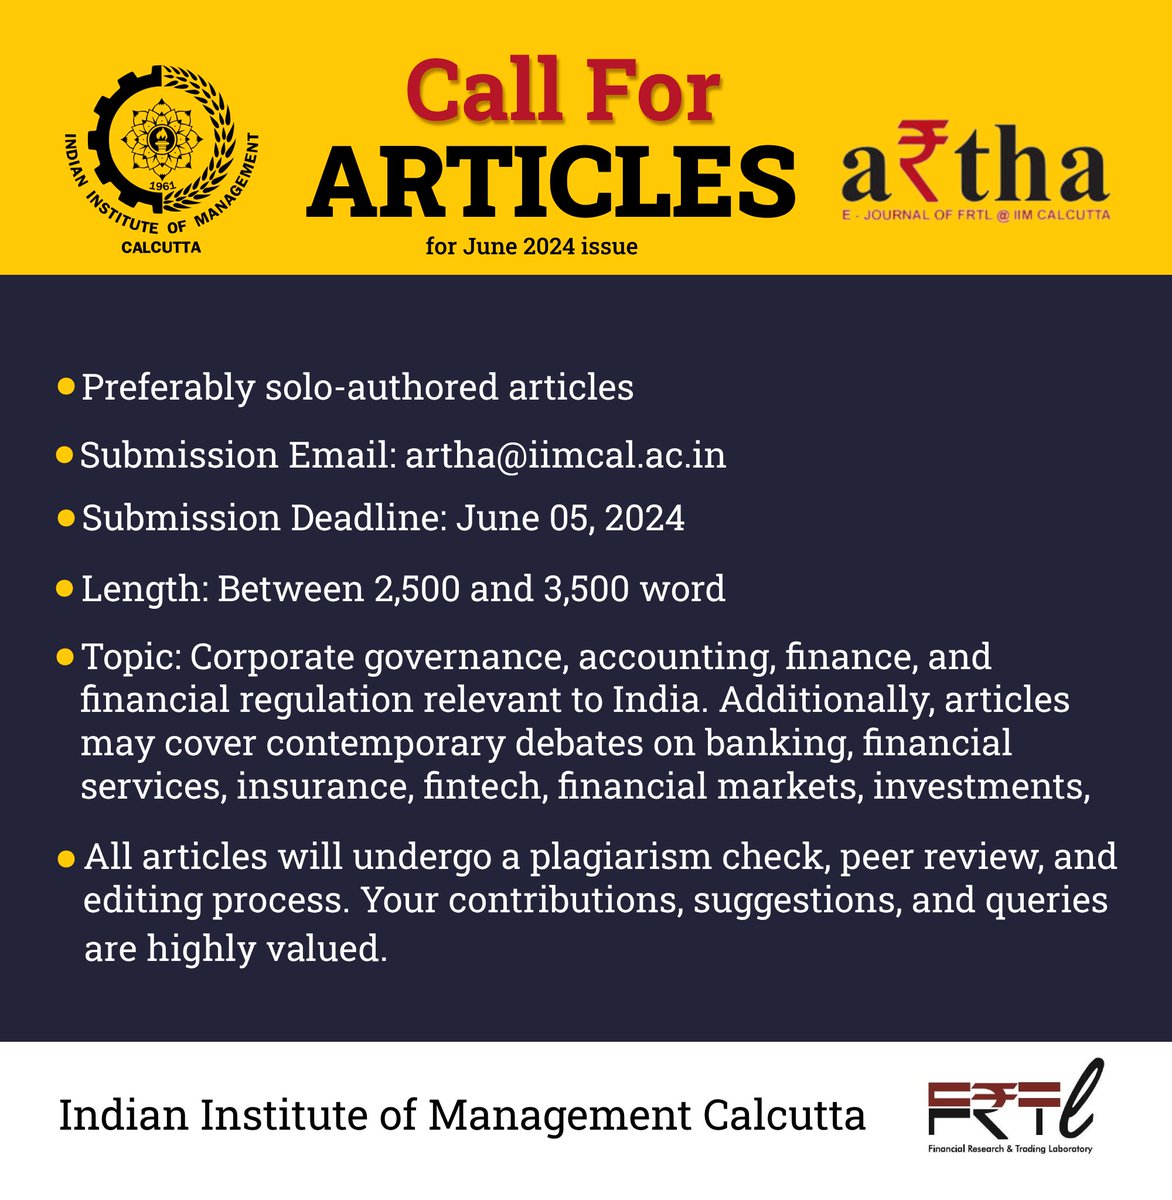 If topics like Corporate Governance, Accounting, Finance, and Financial Regulation intrigue you, kindly contribute towards writing articles for A₹tha's upcoming June 2024 issue published by the Finance Lab at IIMC. For detailed instructions, please read: loom.ly/jOyYhWQ